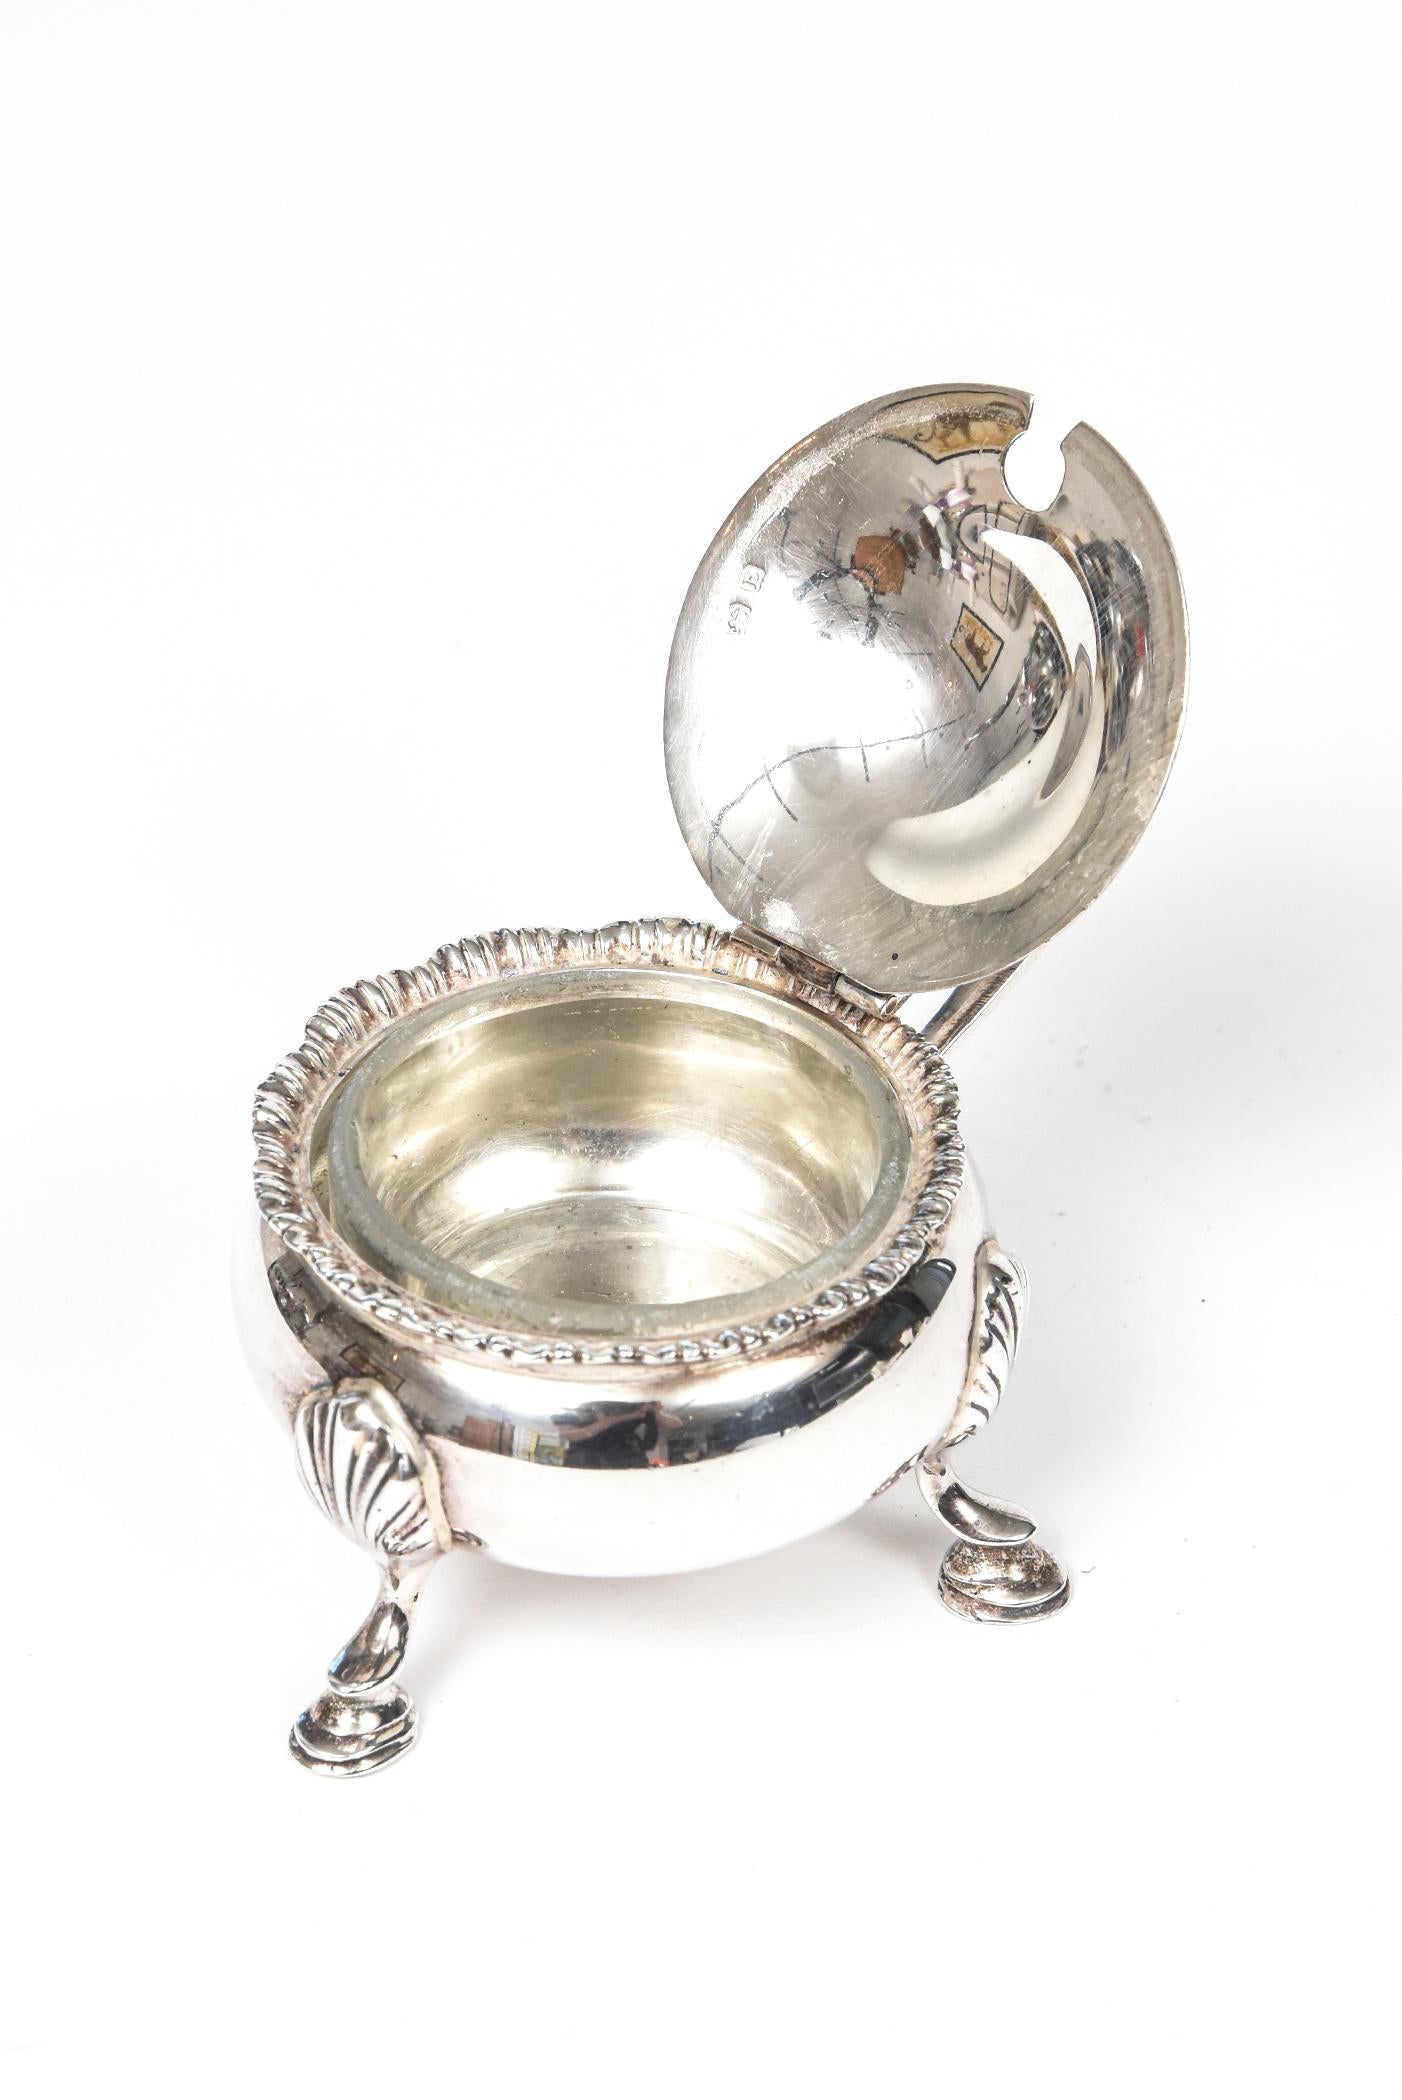 Metalwork Mappin & Webb Sterling Silver Footed Mustard Pot with Glass Liner, Circa 1929 For Sale